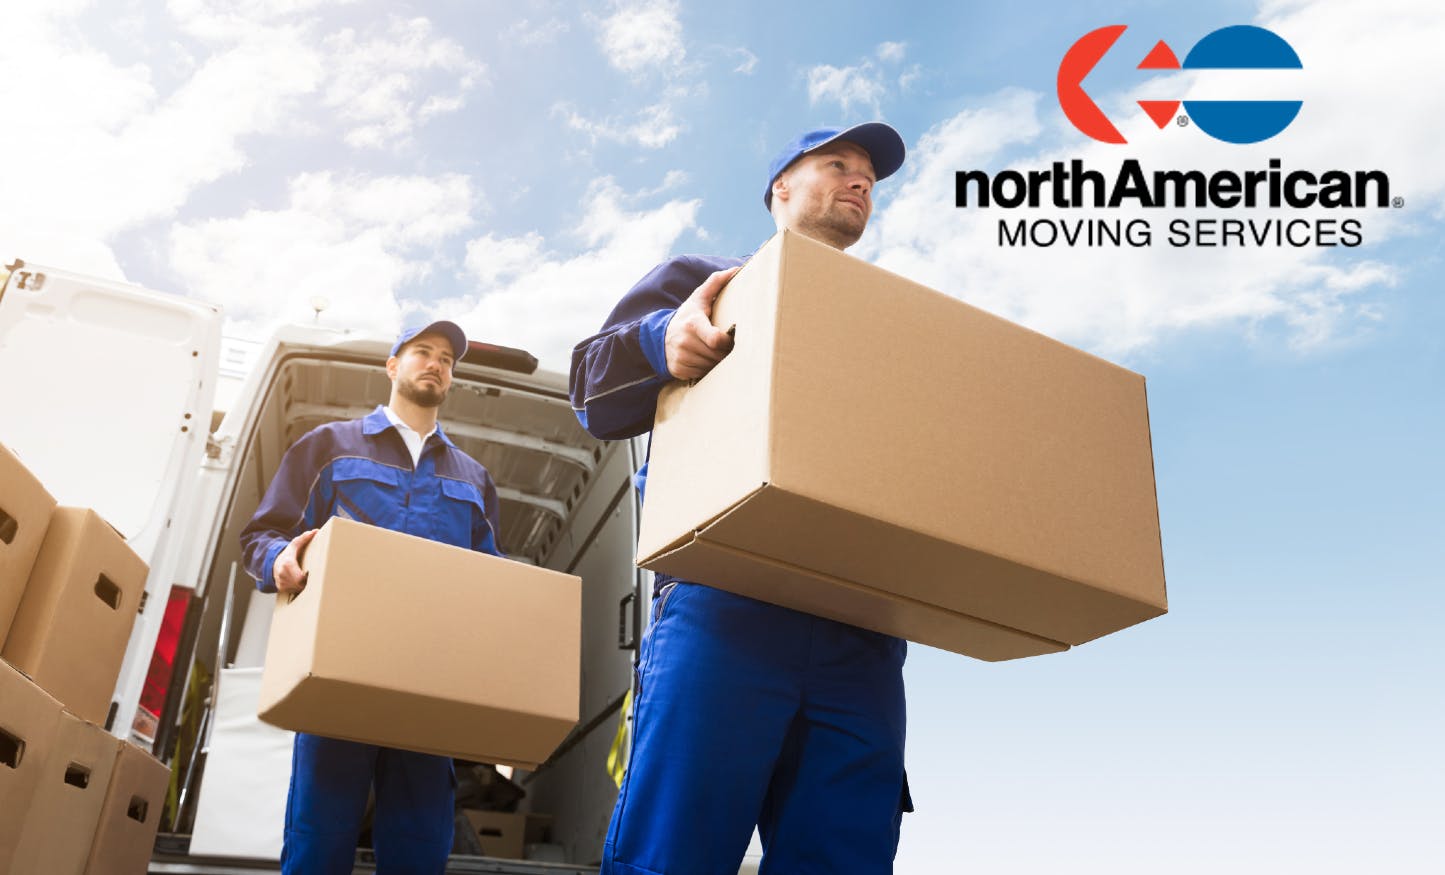 northAmerican Van Lines: Moving Services Full Review